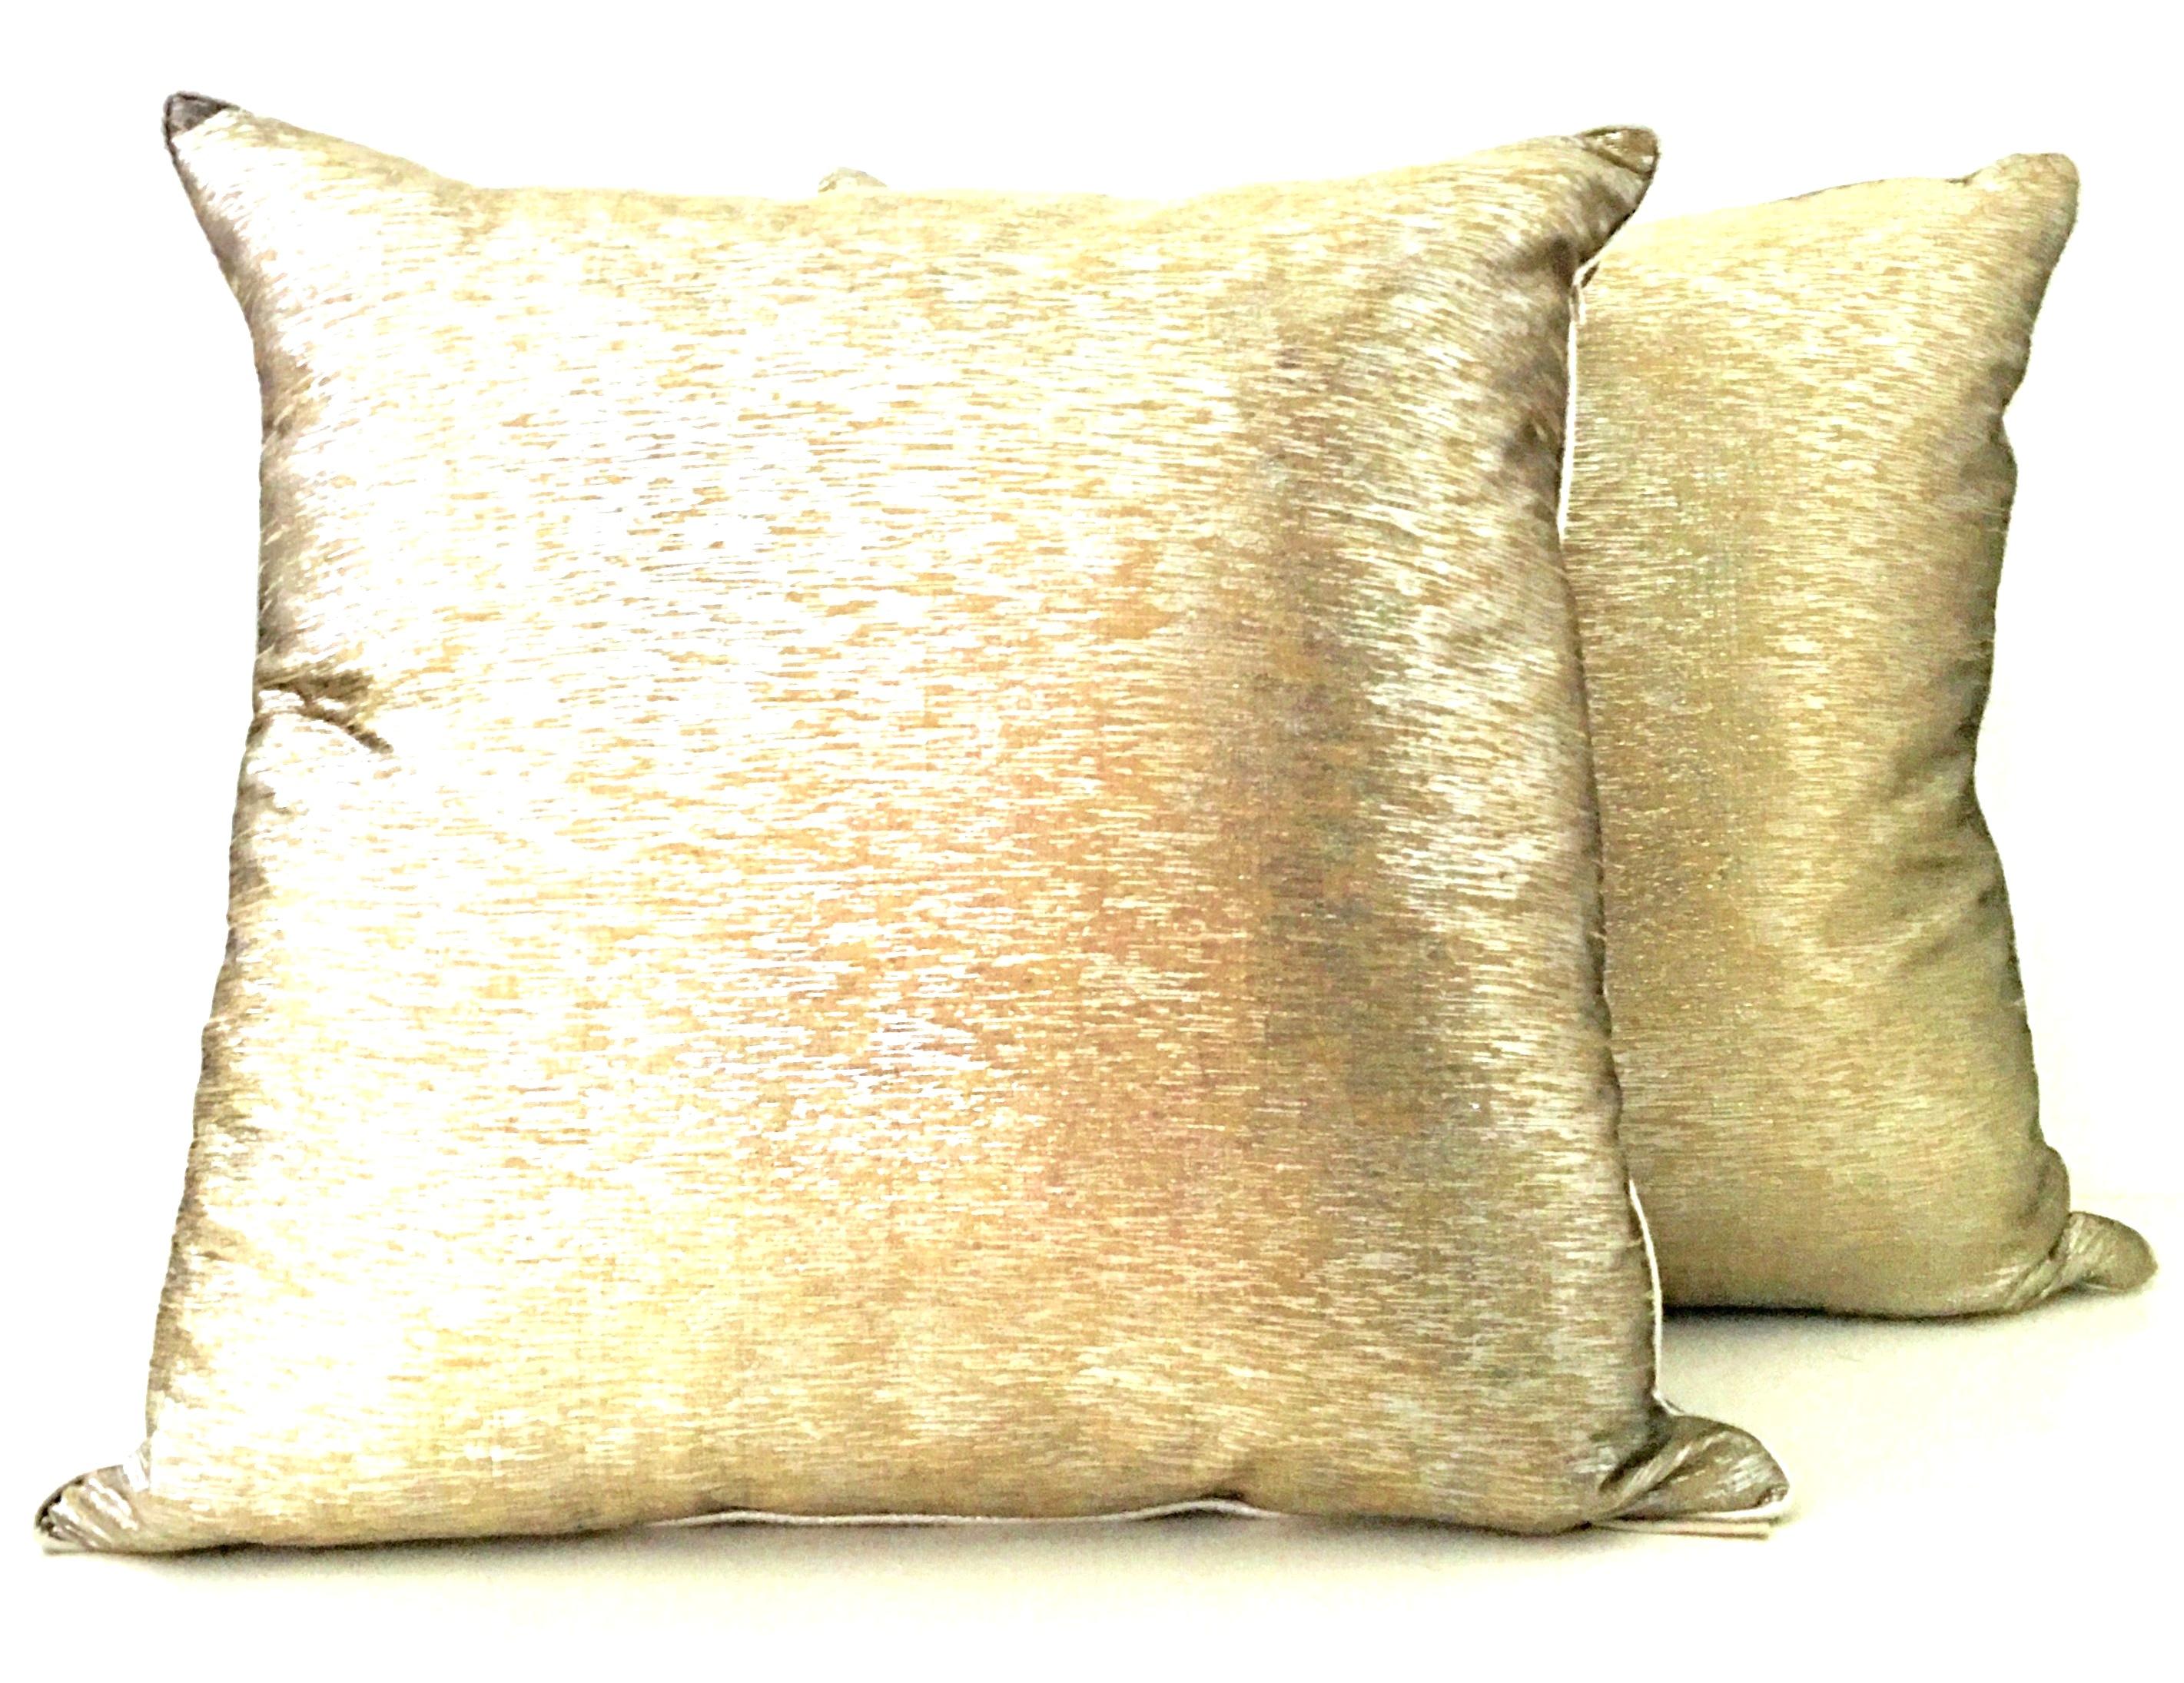 Indian 21st Century Pair Of Silk Metallic Two-Tone Gold and Silver Down Pillows